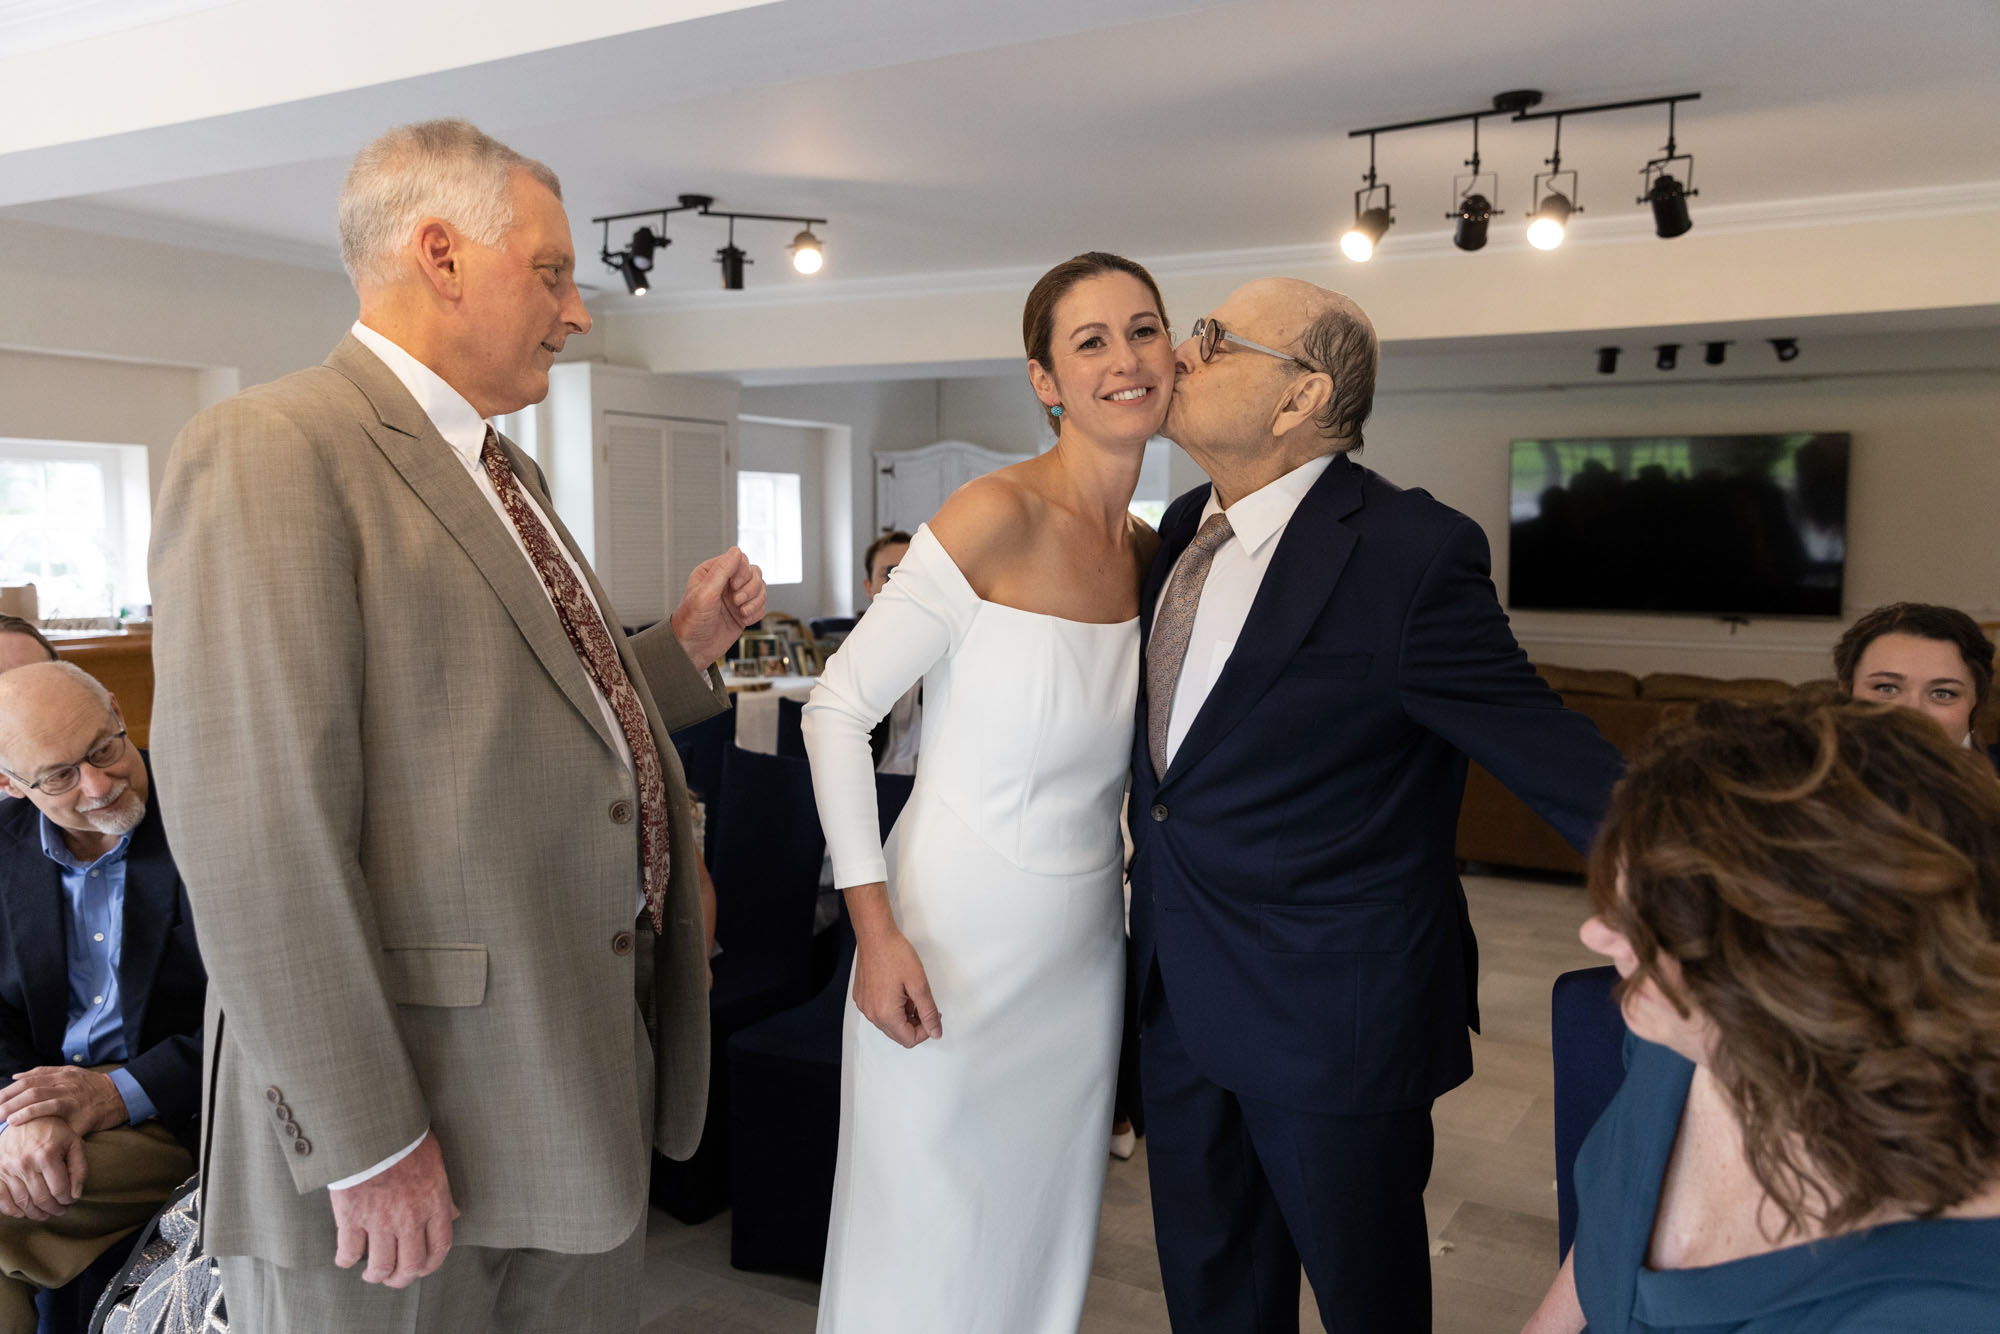 Elegant bride gets a kiss from her dad as her step father looks on during her wedding ceremony at Chimney Hill Estate Inn in Lambertville, NJ